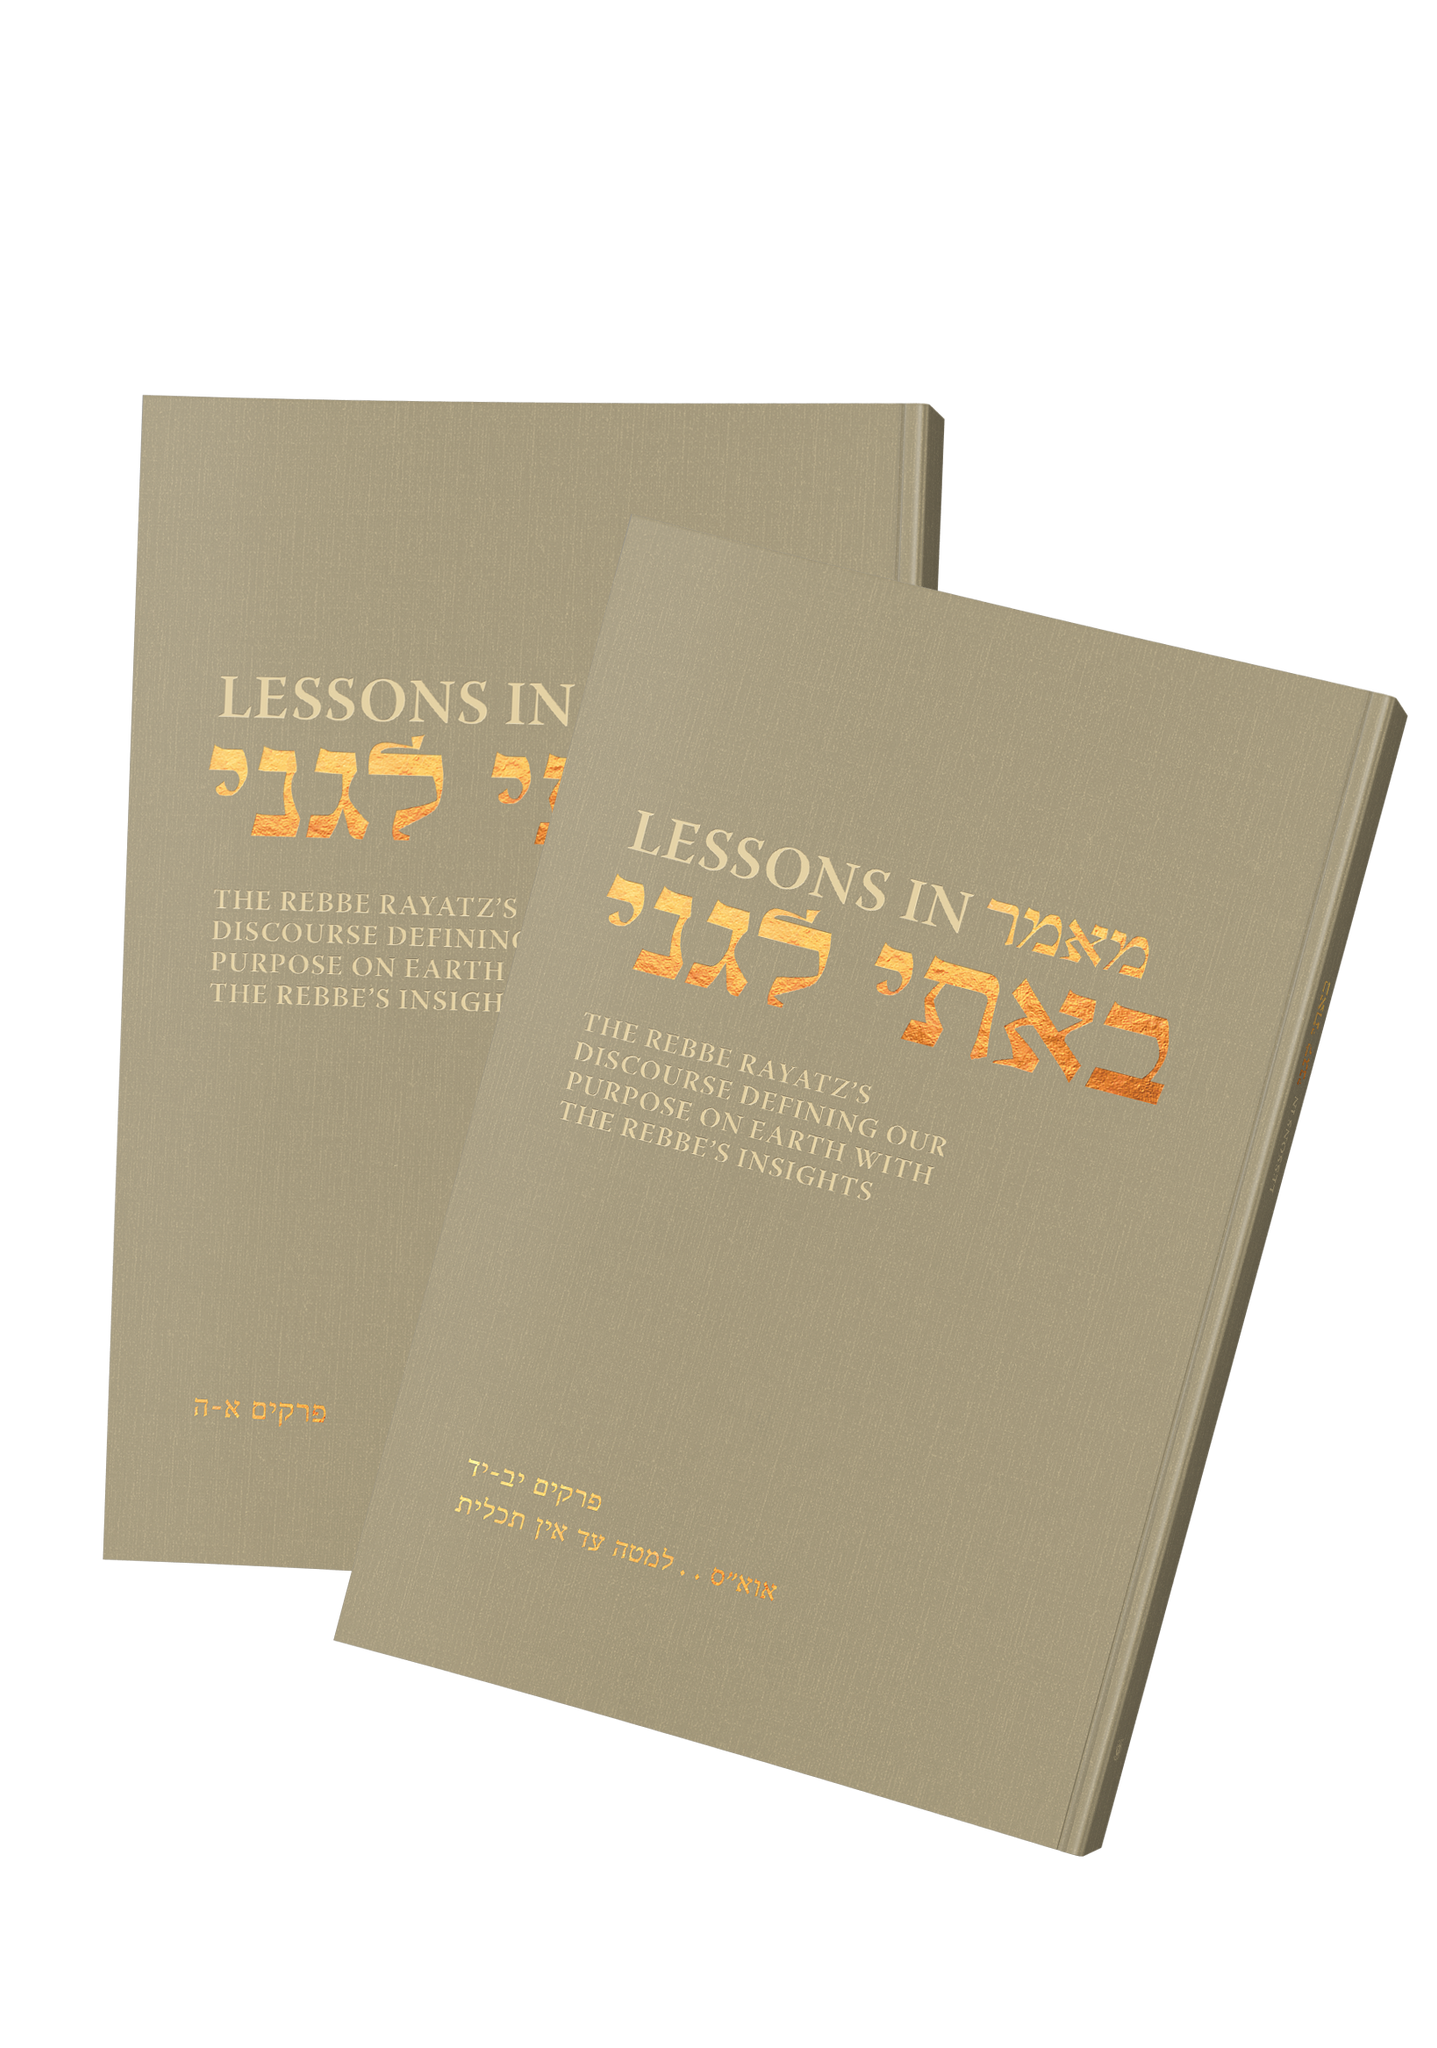 Lessons In Basi Legani Chapters 1-5 & 12-14